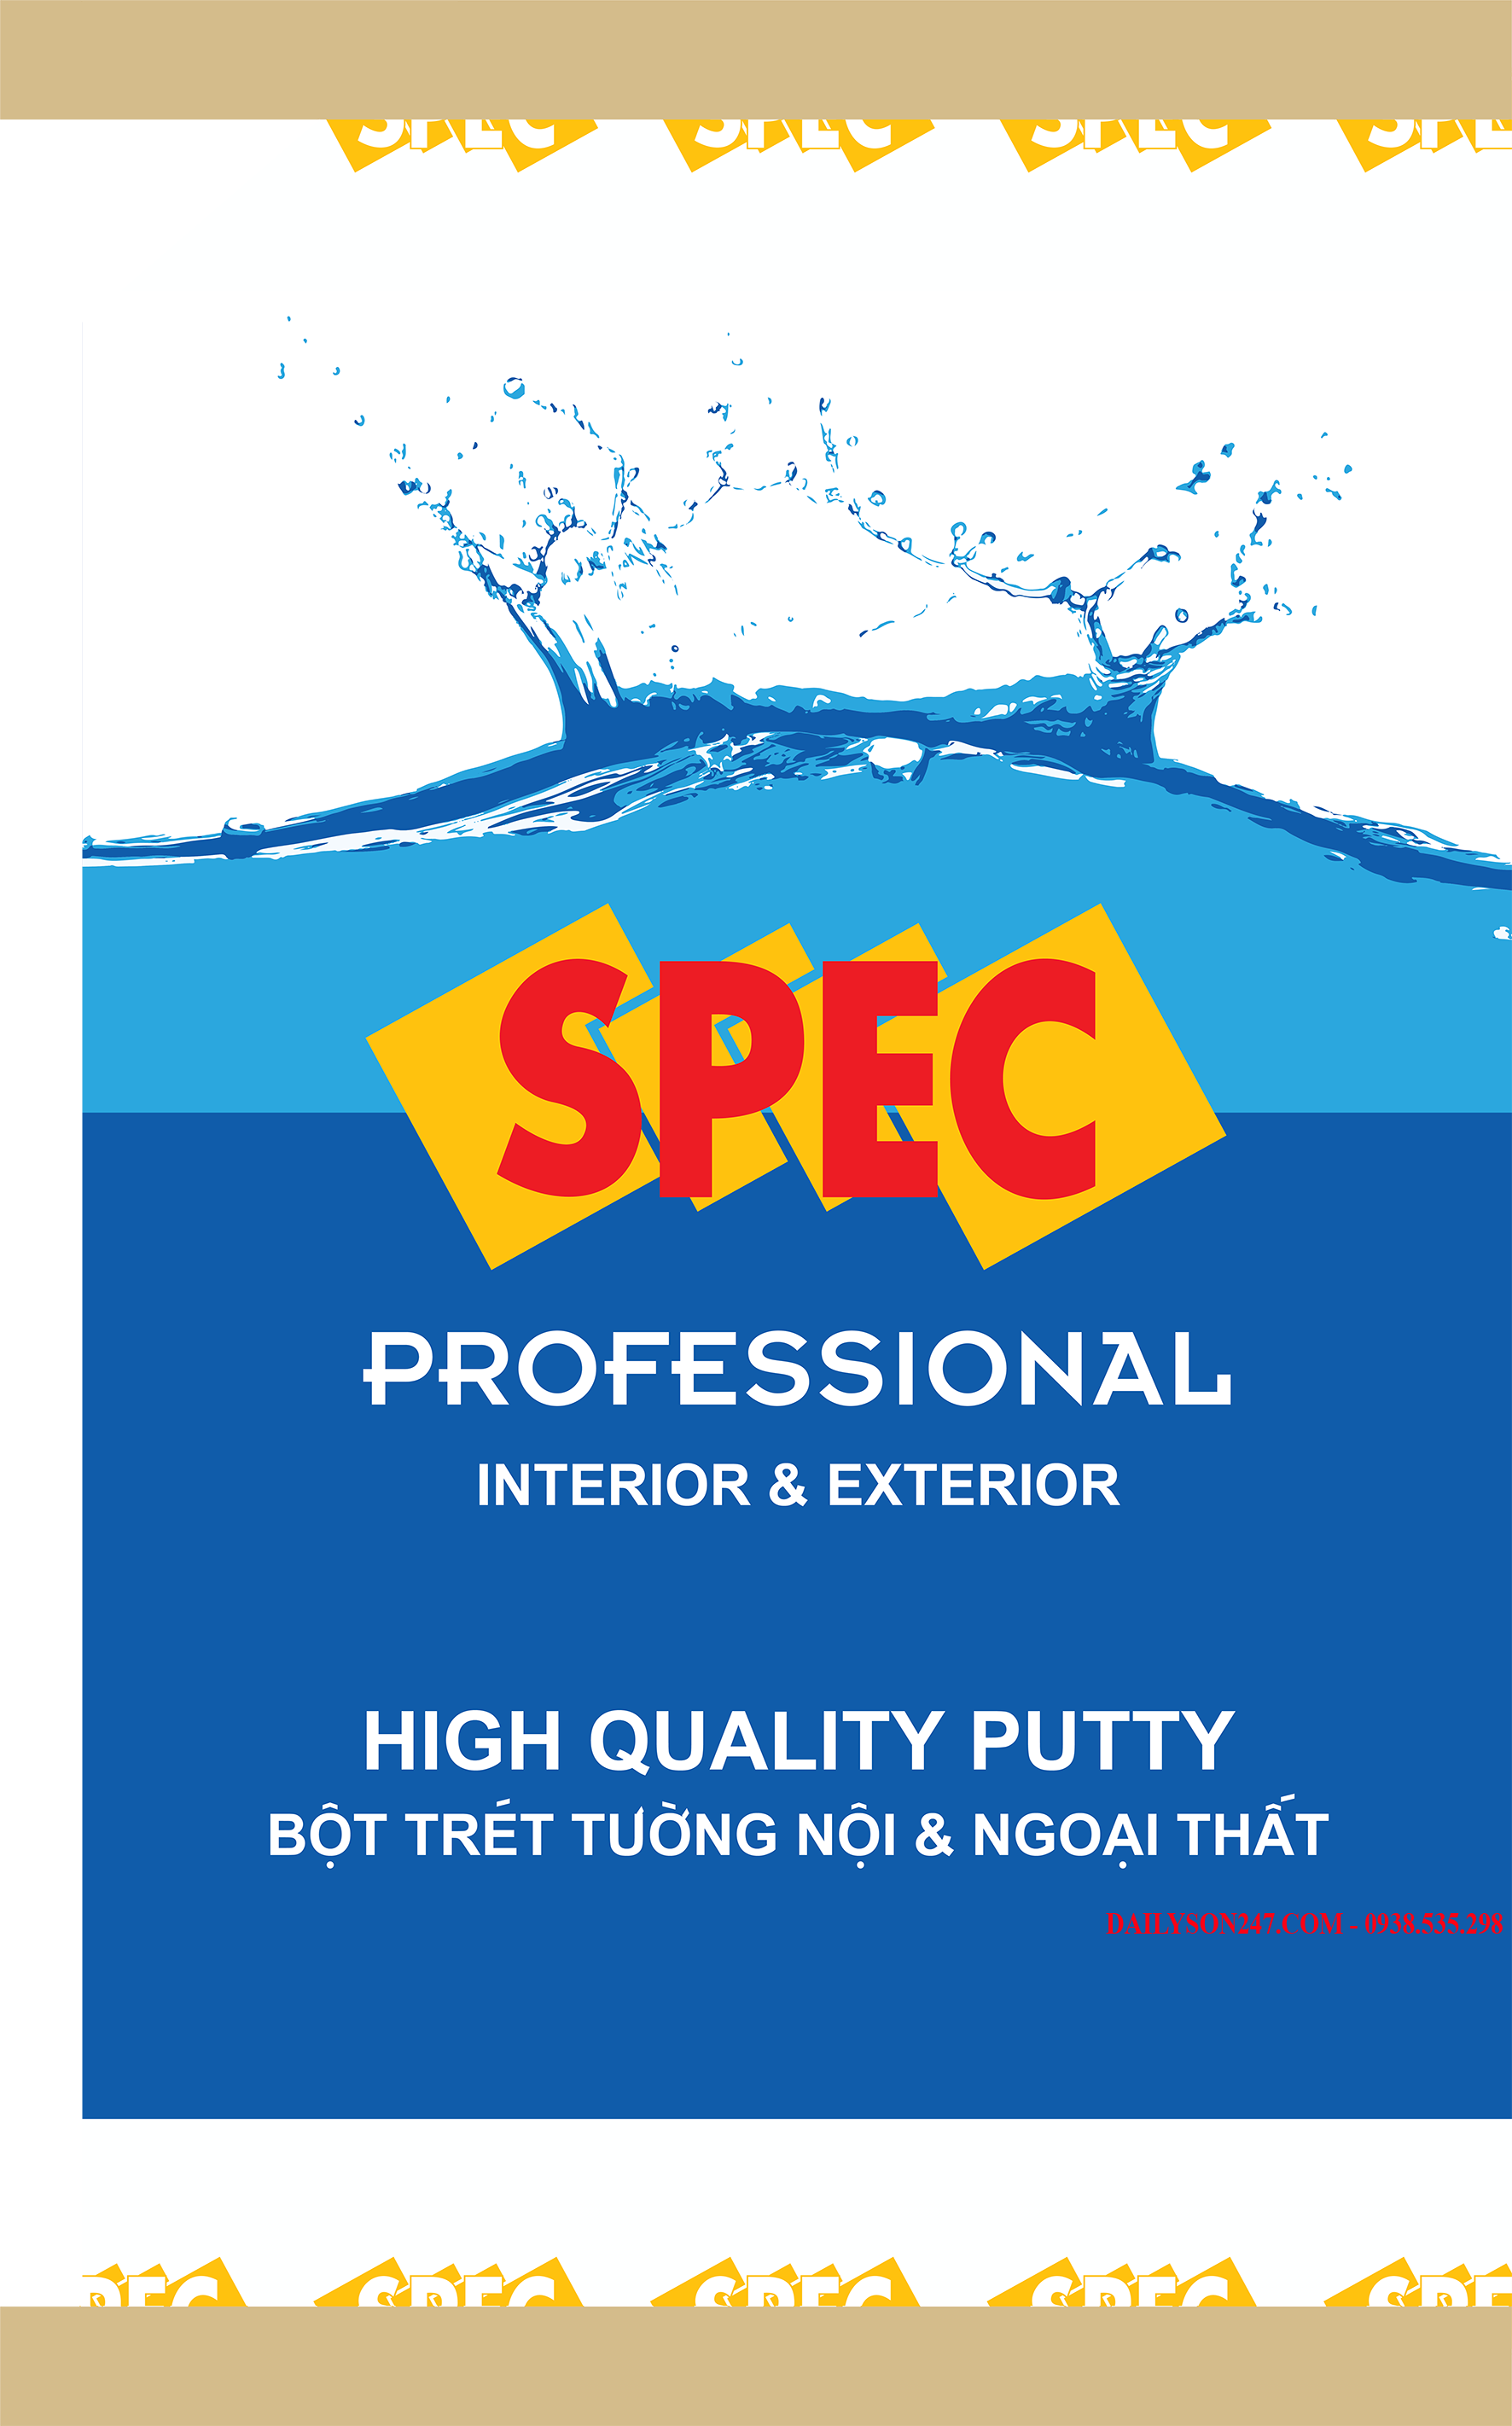 bot-tret-truong-spec-professional-putty-int-ext-bot-tret-tuong-noi-that-ngoai-that-spec